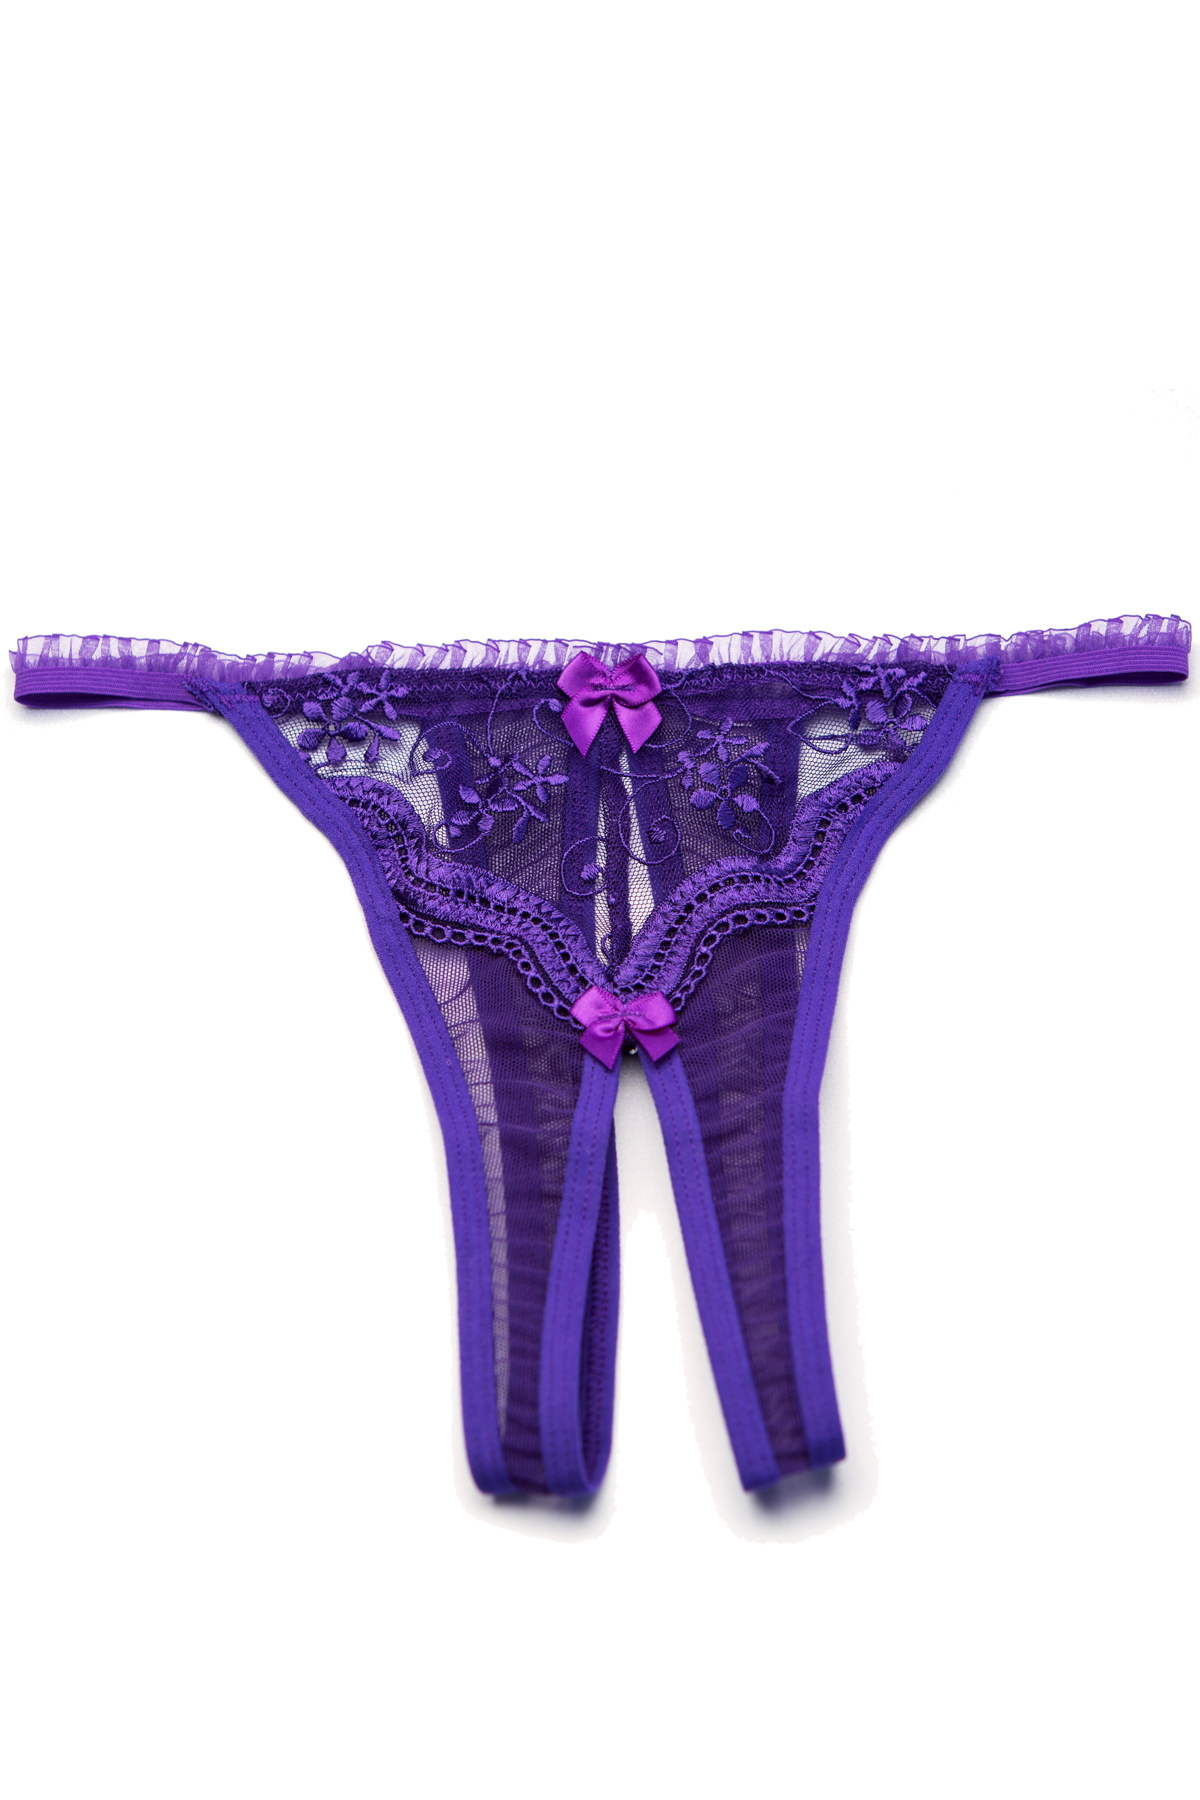 Come Over Later Crotchless Panty - Purple